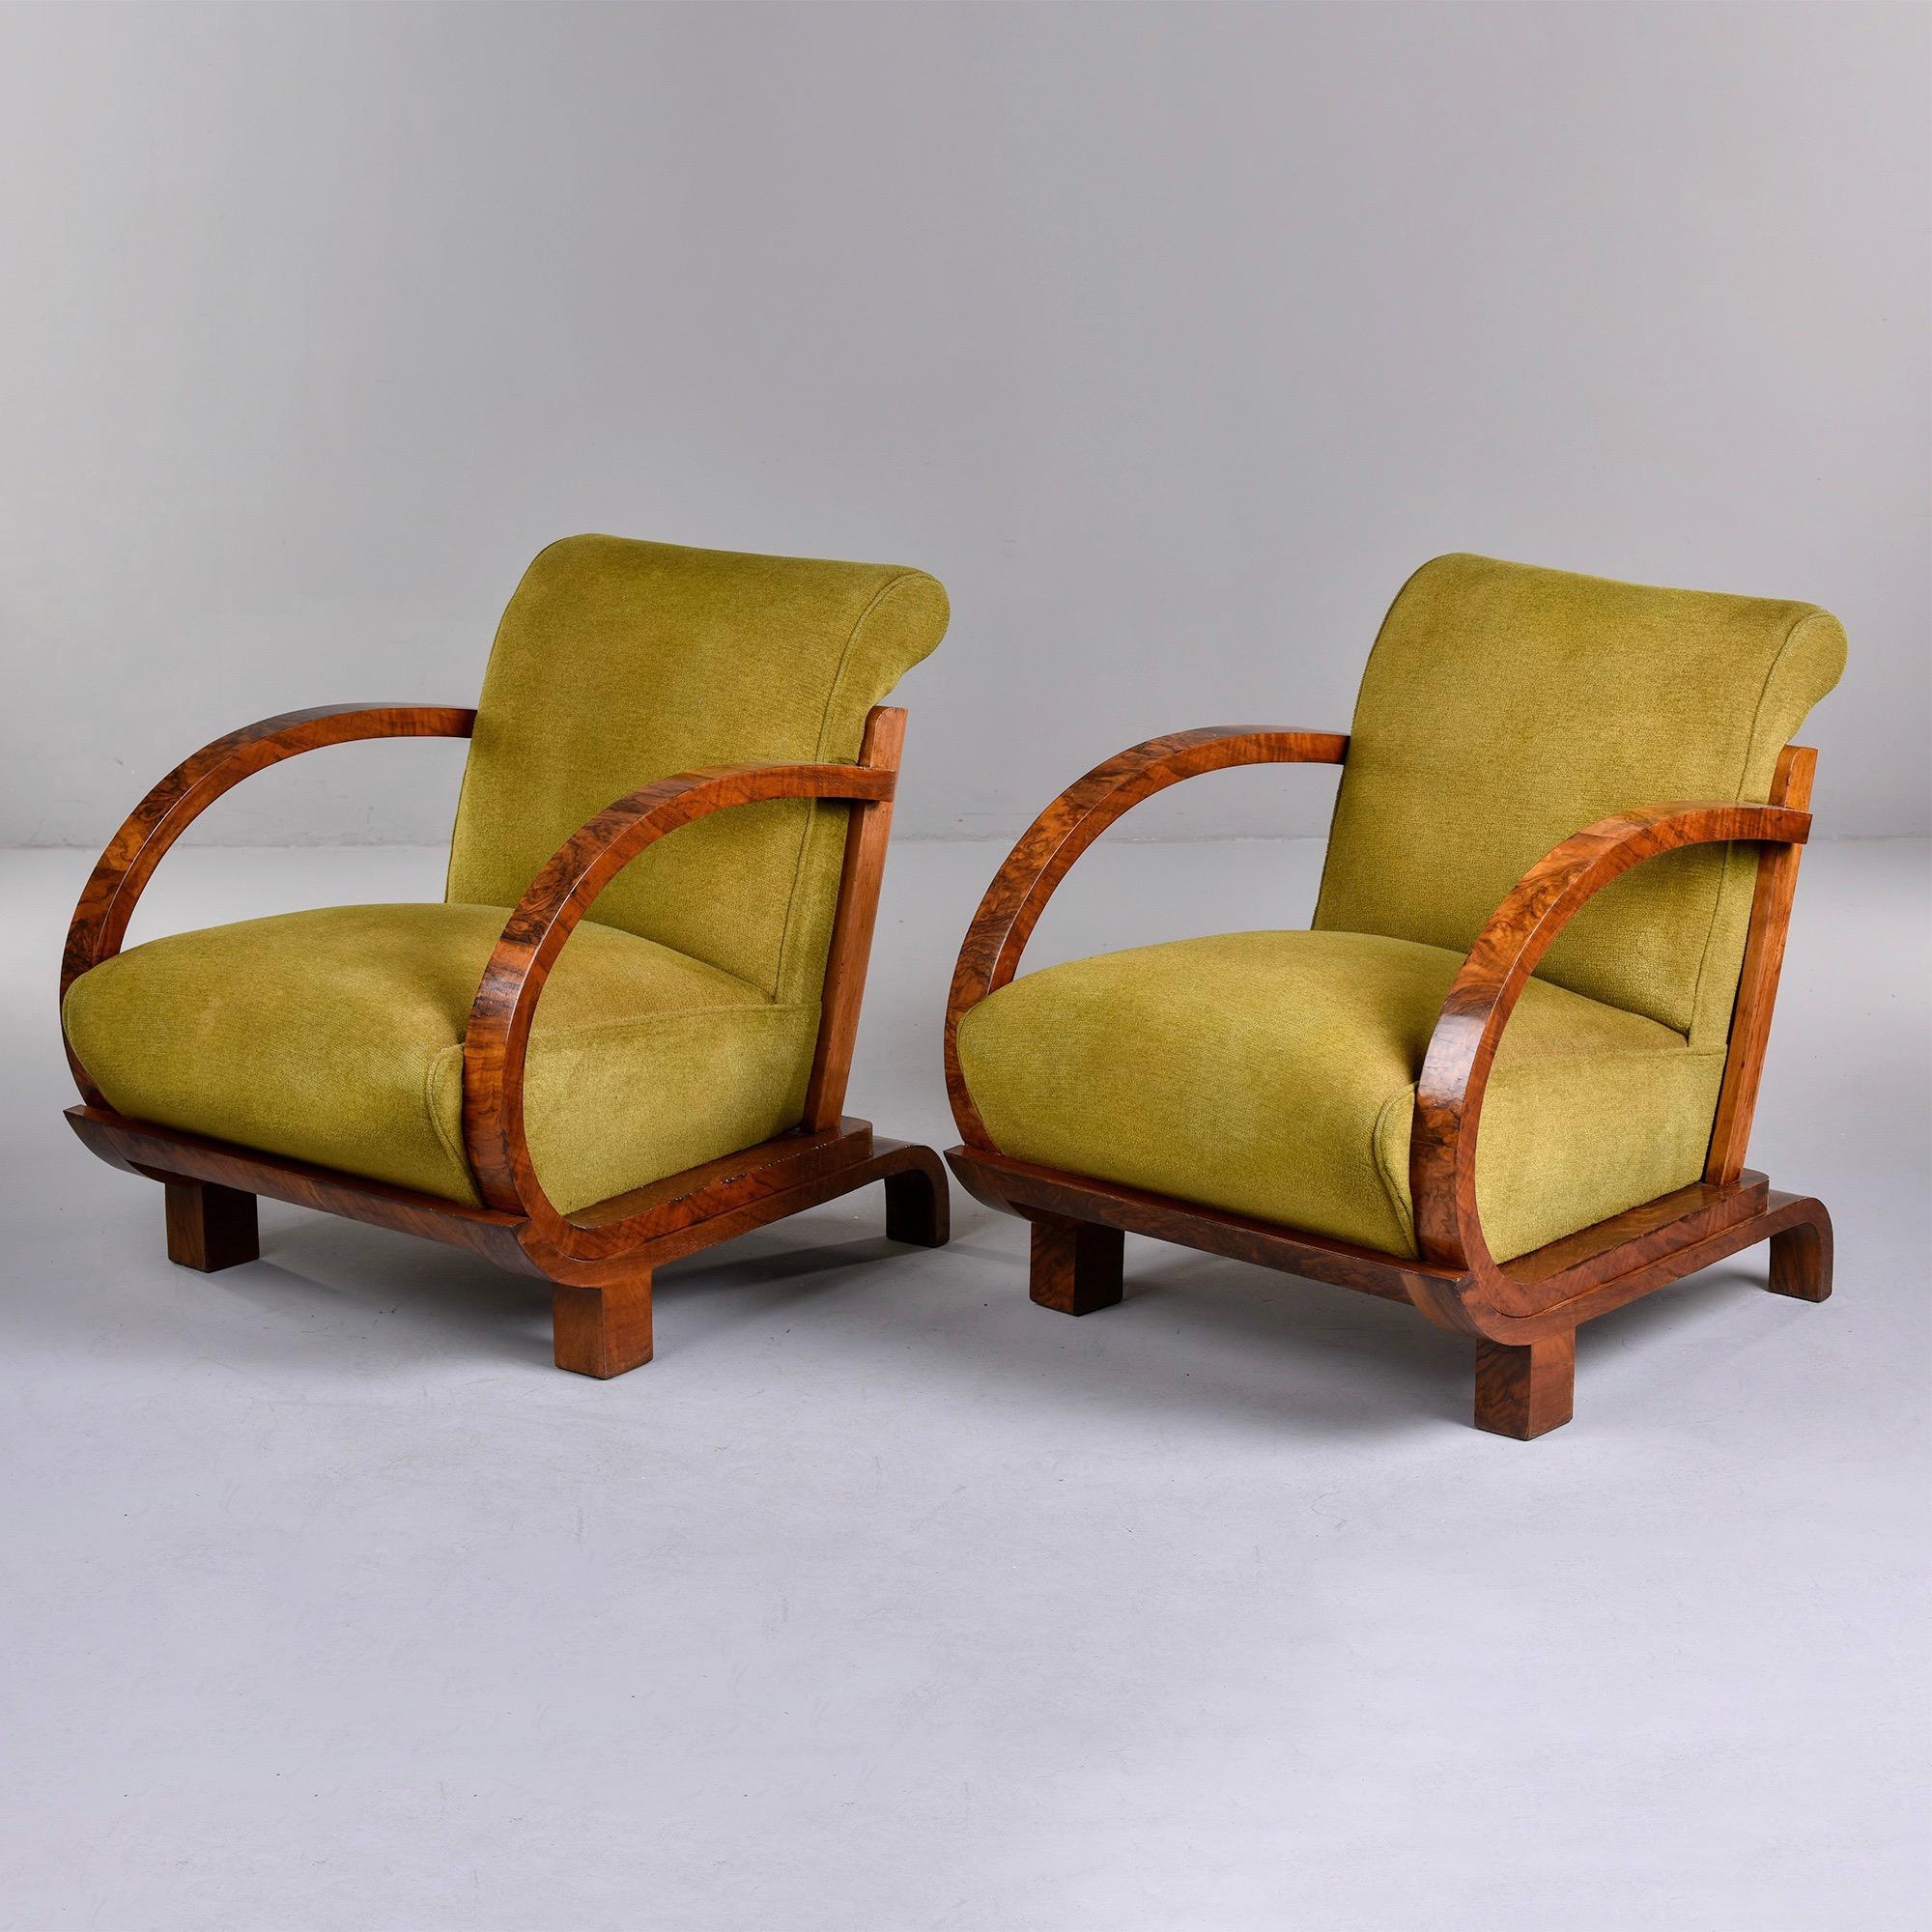 Circa 1930s French Art Deco armchairs have curvy bentwood arms and the frames are finished with burlwood veneer. Upholstered seat and back is a single removable piece. Chairs are covered in what we believe is the original mohair upholstery.